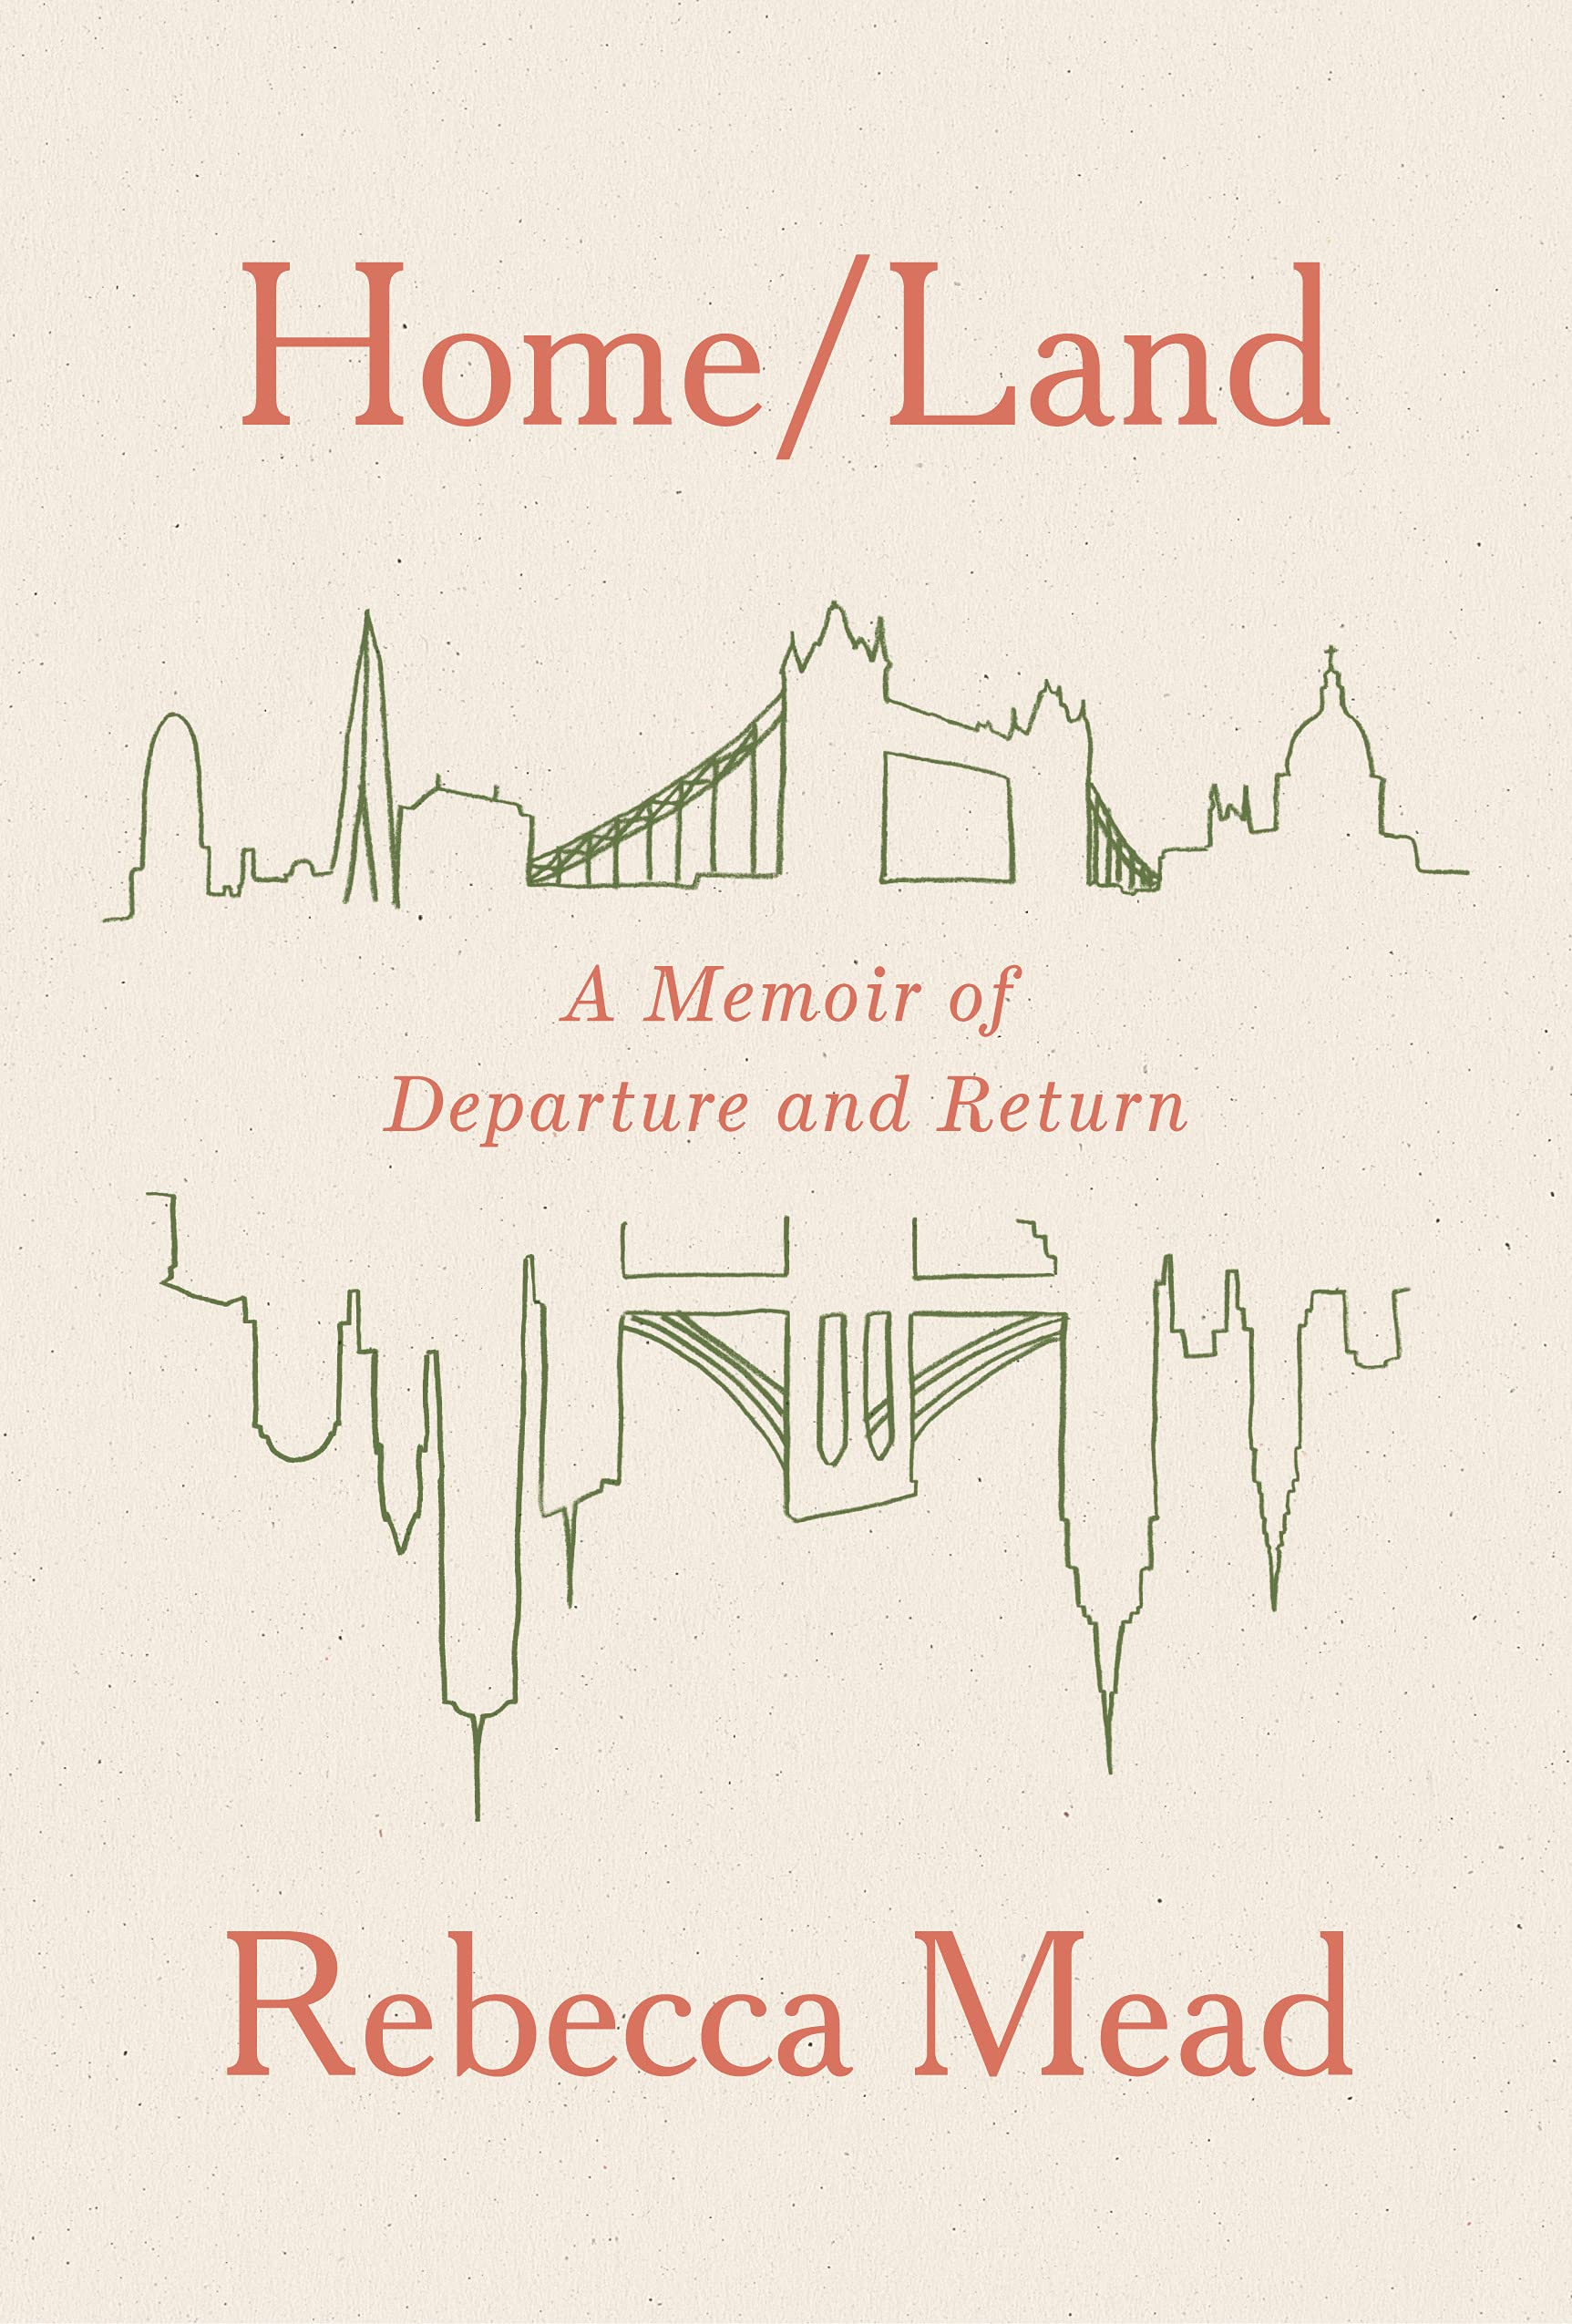 HOME/LAND by Rebecca Mead